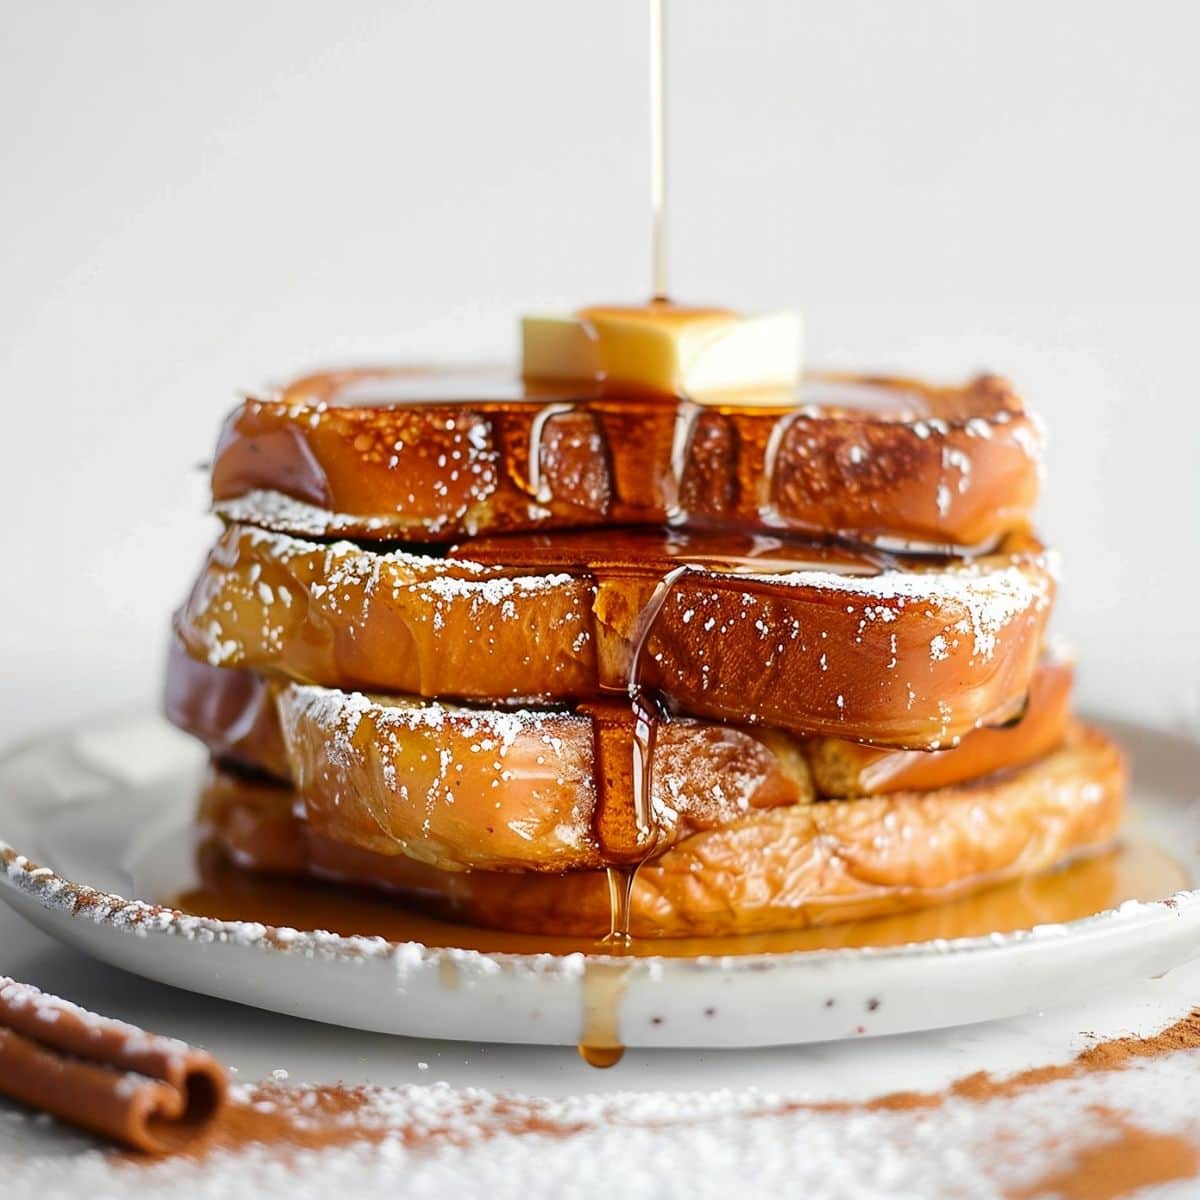 Stack of Eggnog French Toast with Butter, Powdered Sugar, Cinnamon, and Syrup Dripping Down the Stack on a White Plate